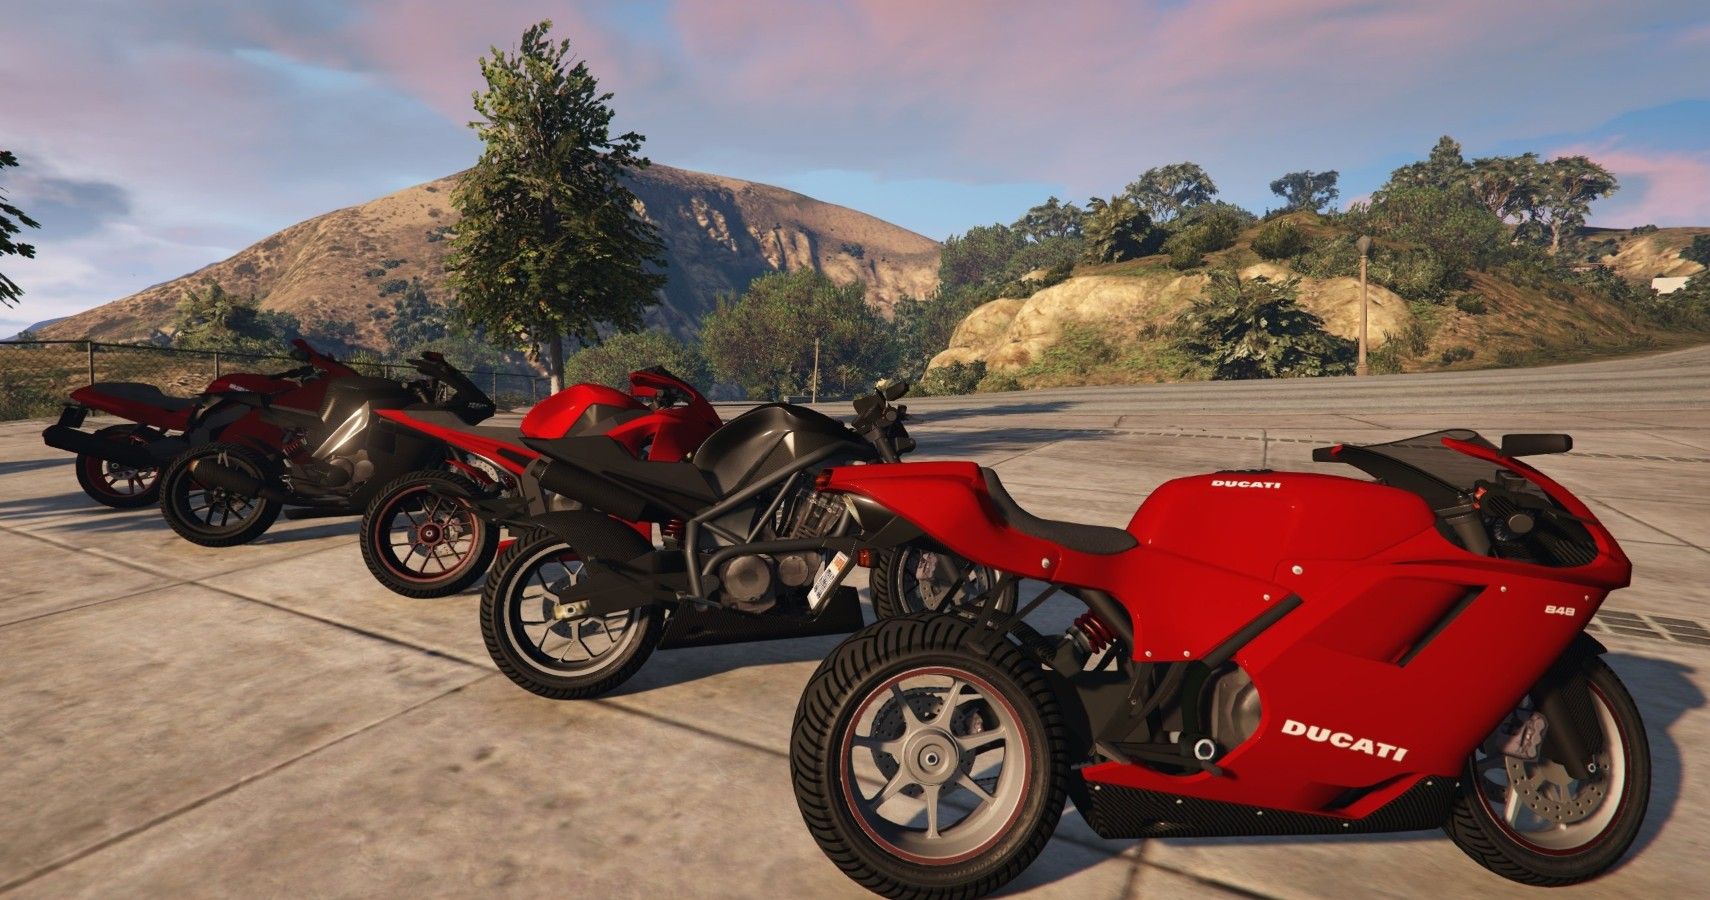 The GTA Online fastest bikes for racing and riding